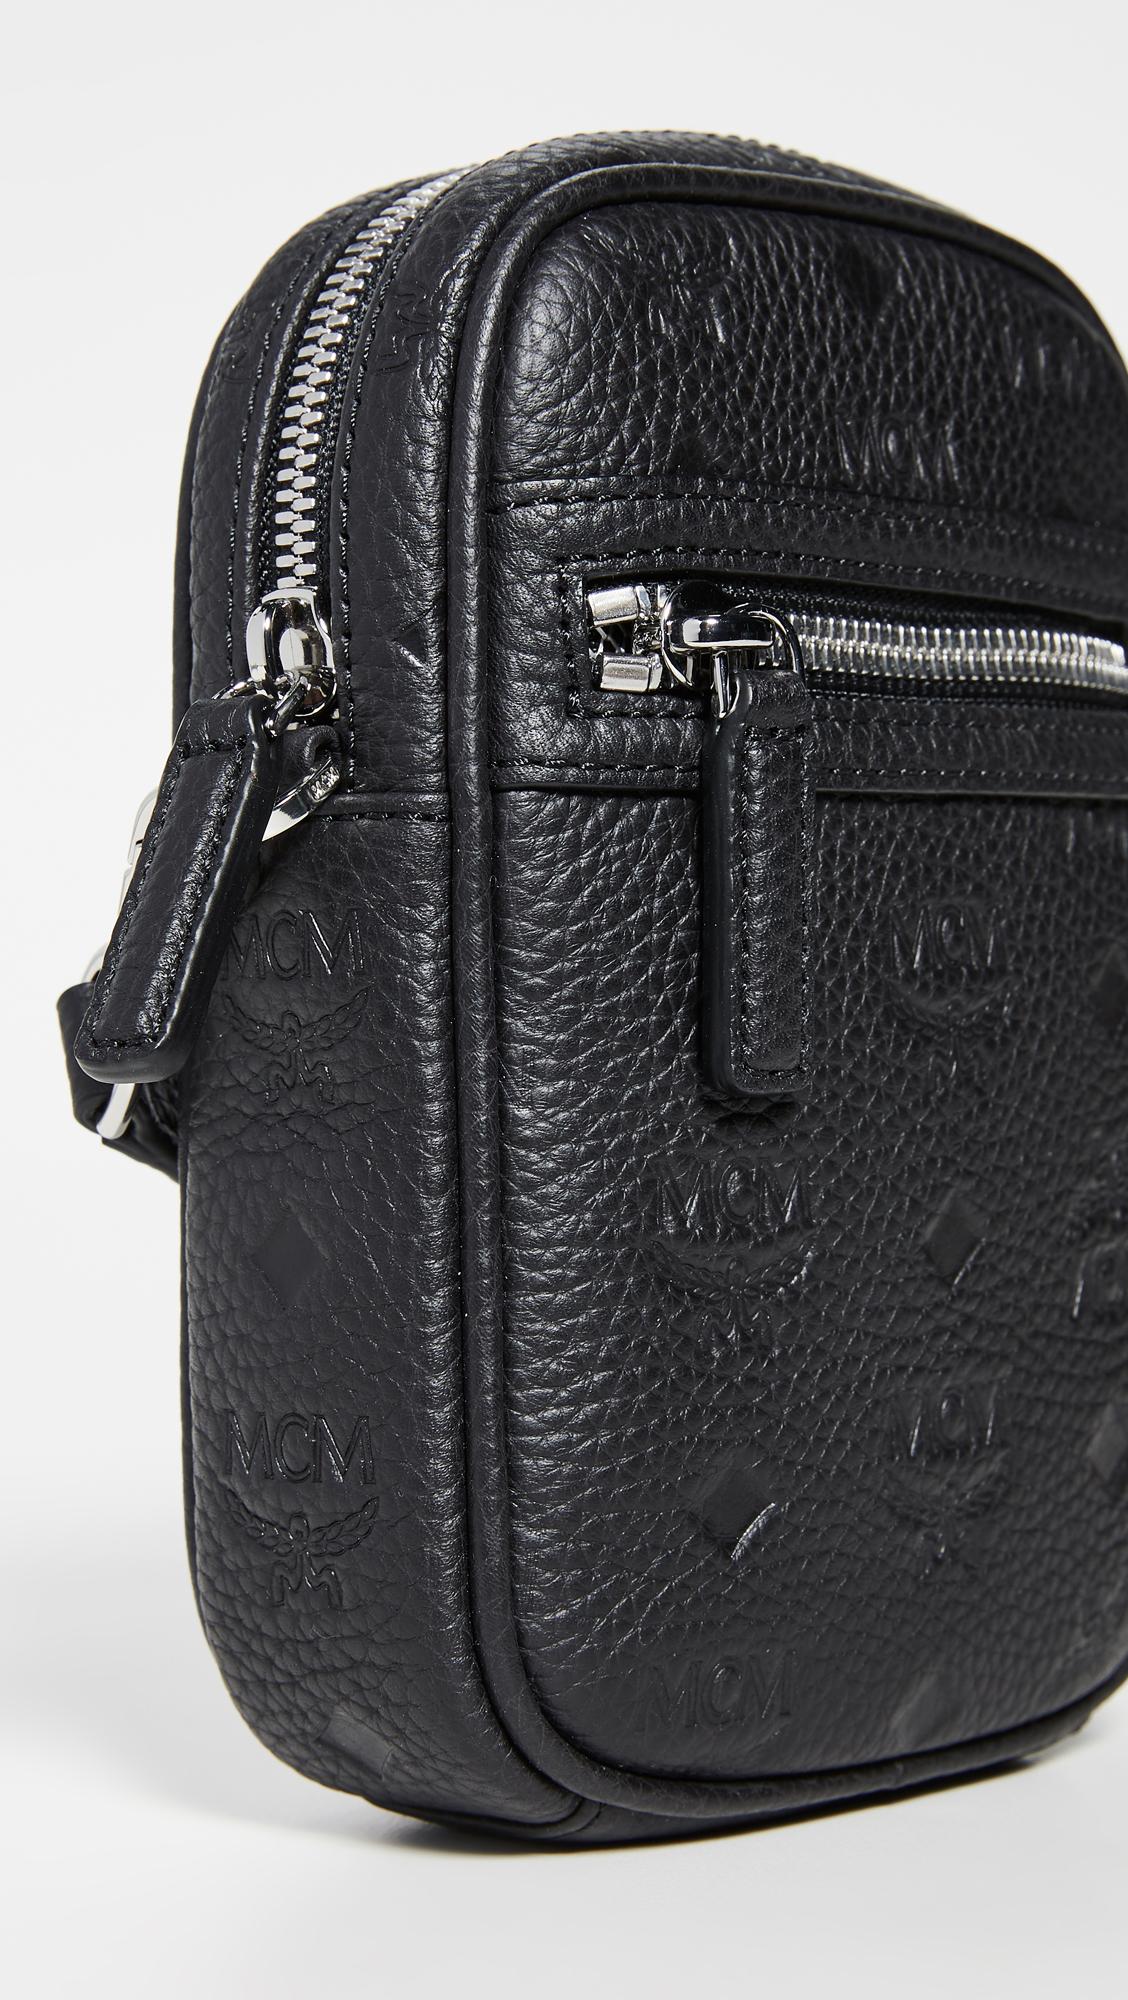 MCM Max Leather Small Crossbody Bag in Black for Men - Lyst